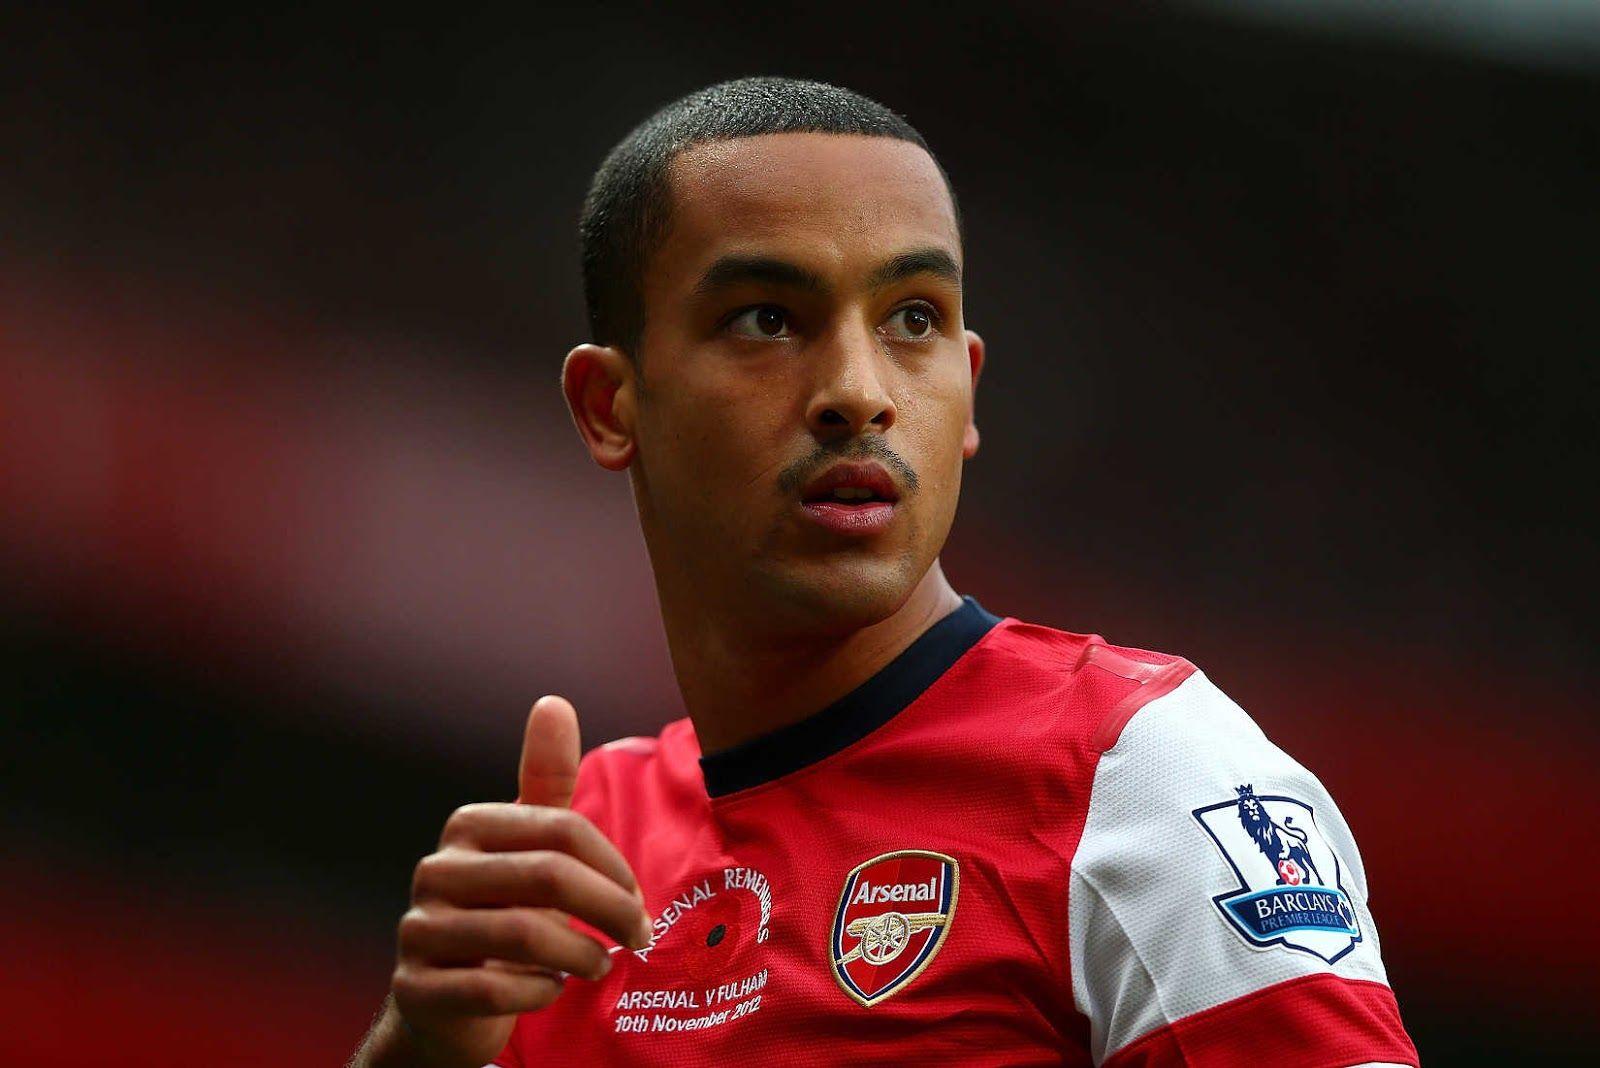 Why Arsenal's Theo Walcott Would Be A Positive Signing